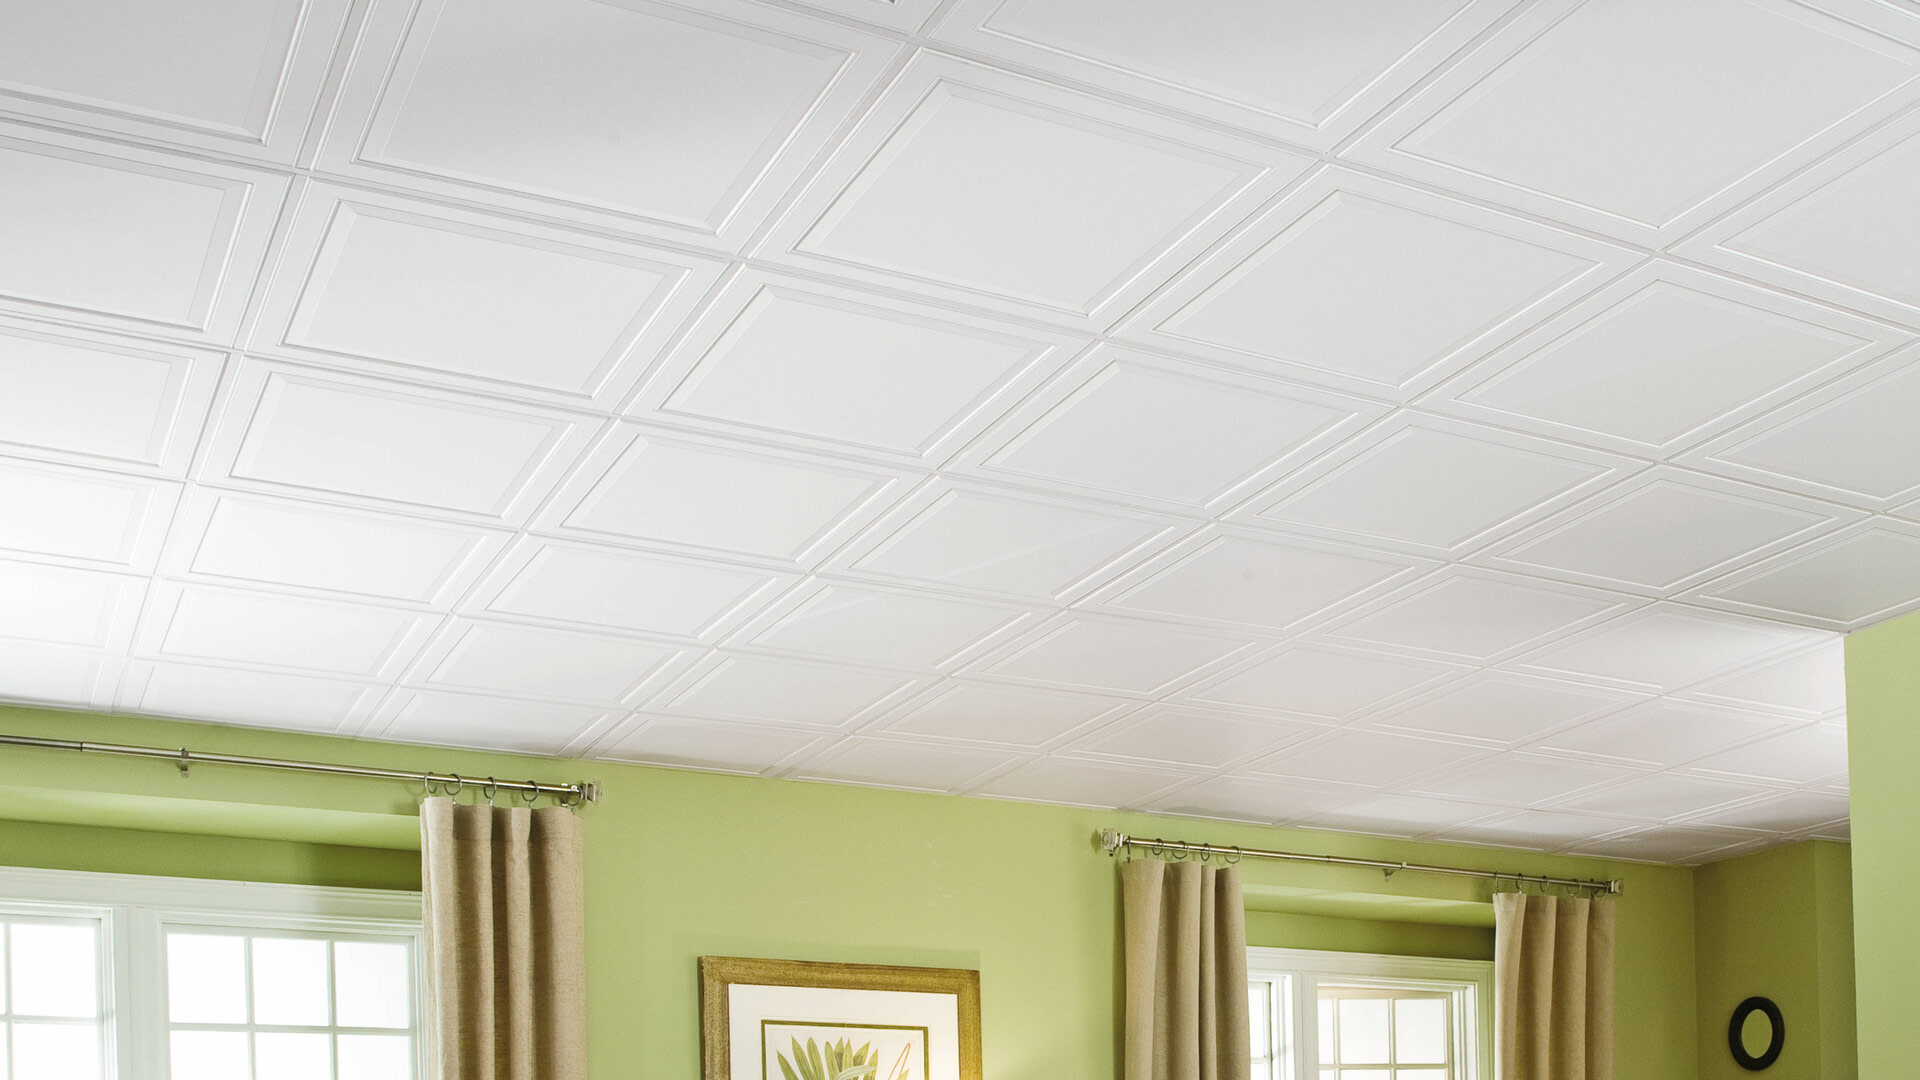 Ceiling Centre has been installing quality basement ceilings for 40 years!